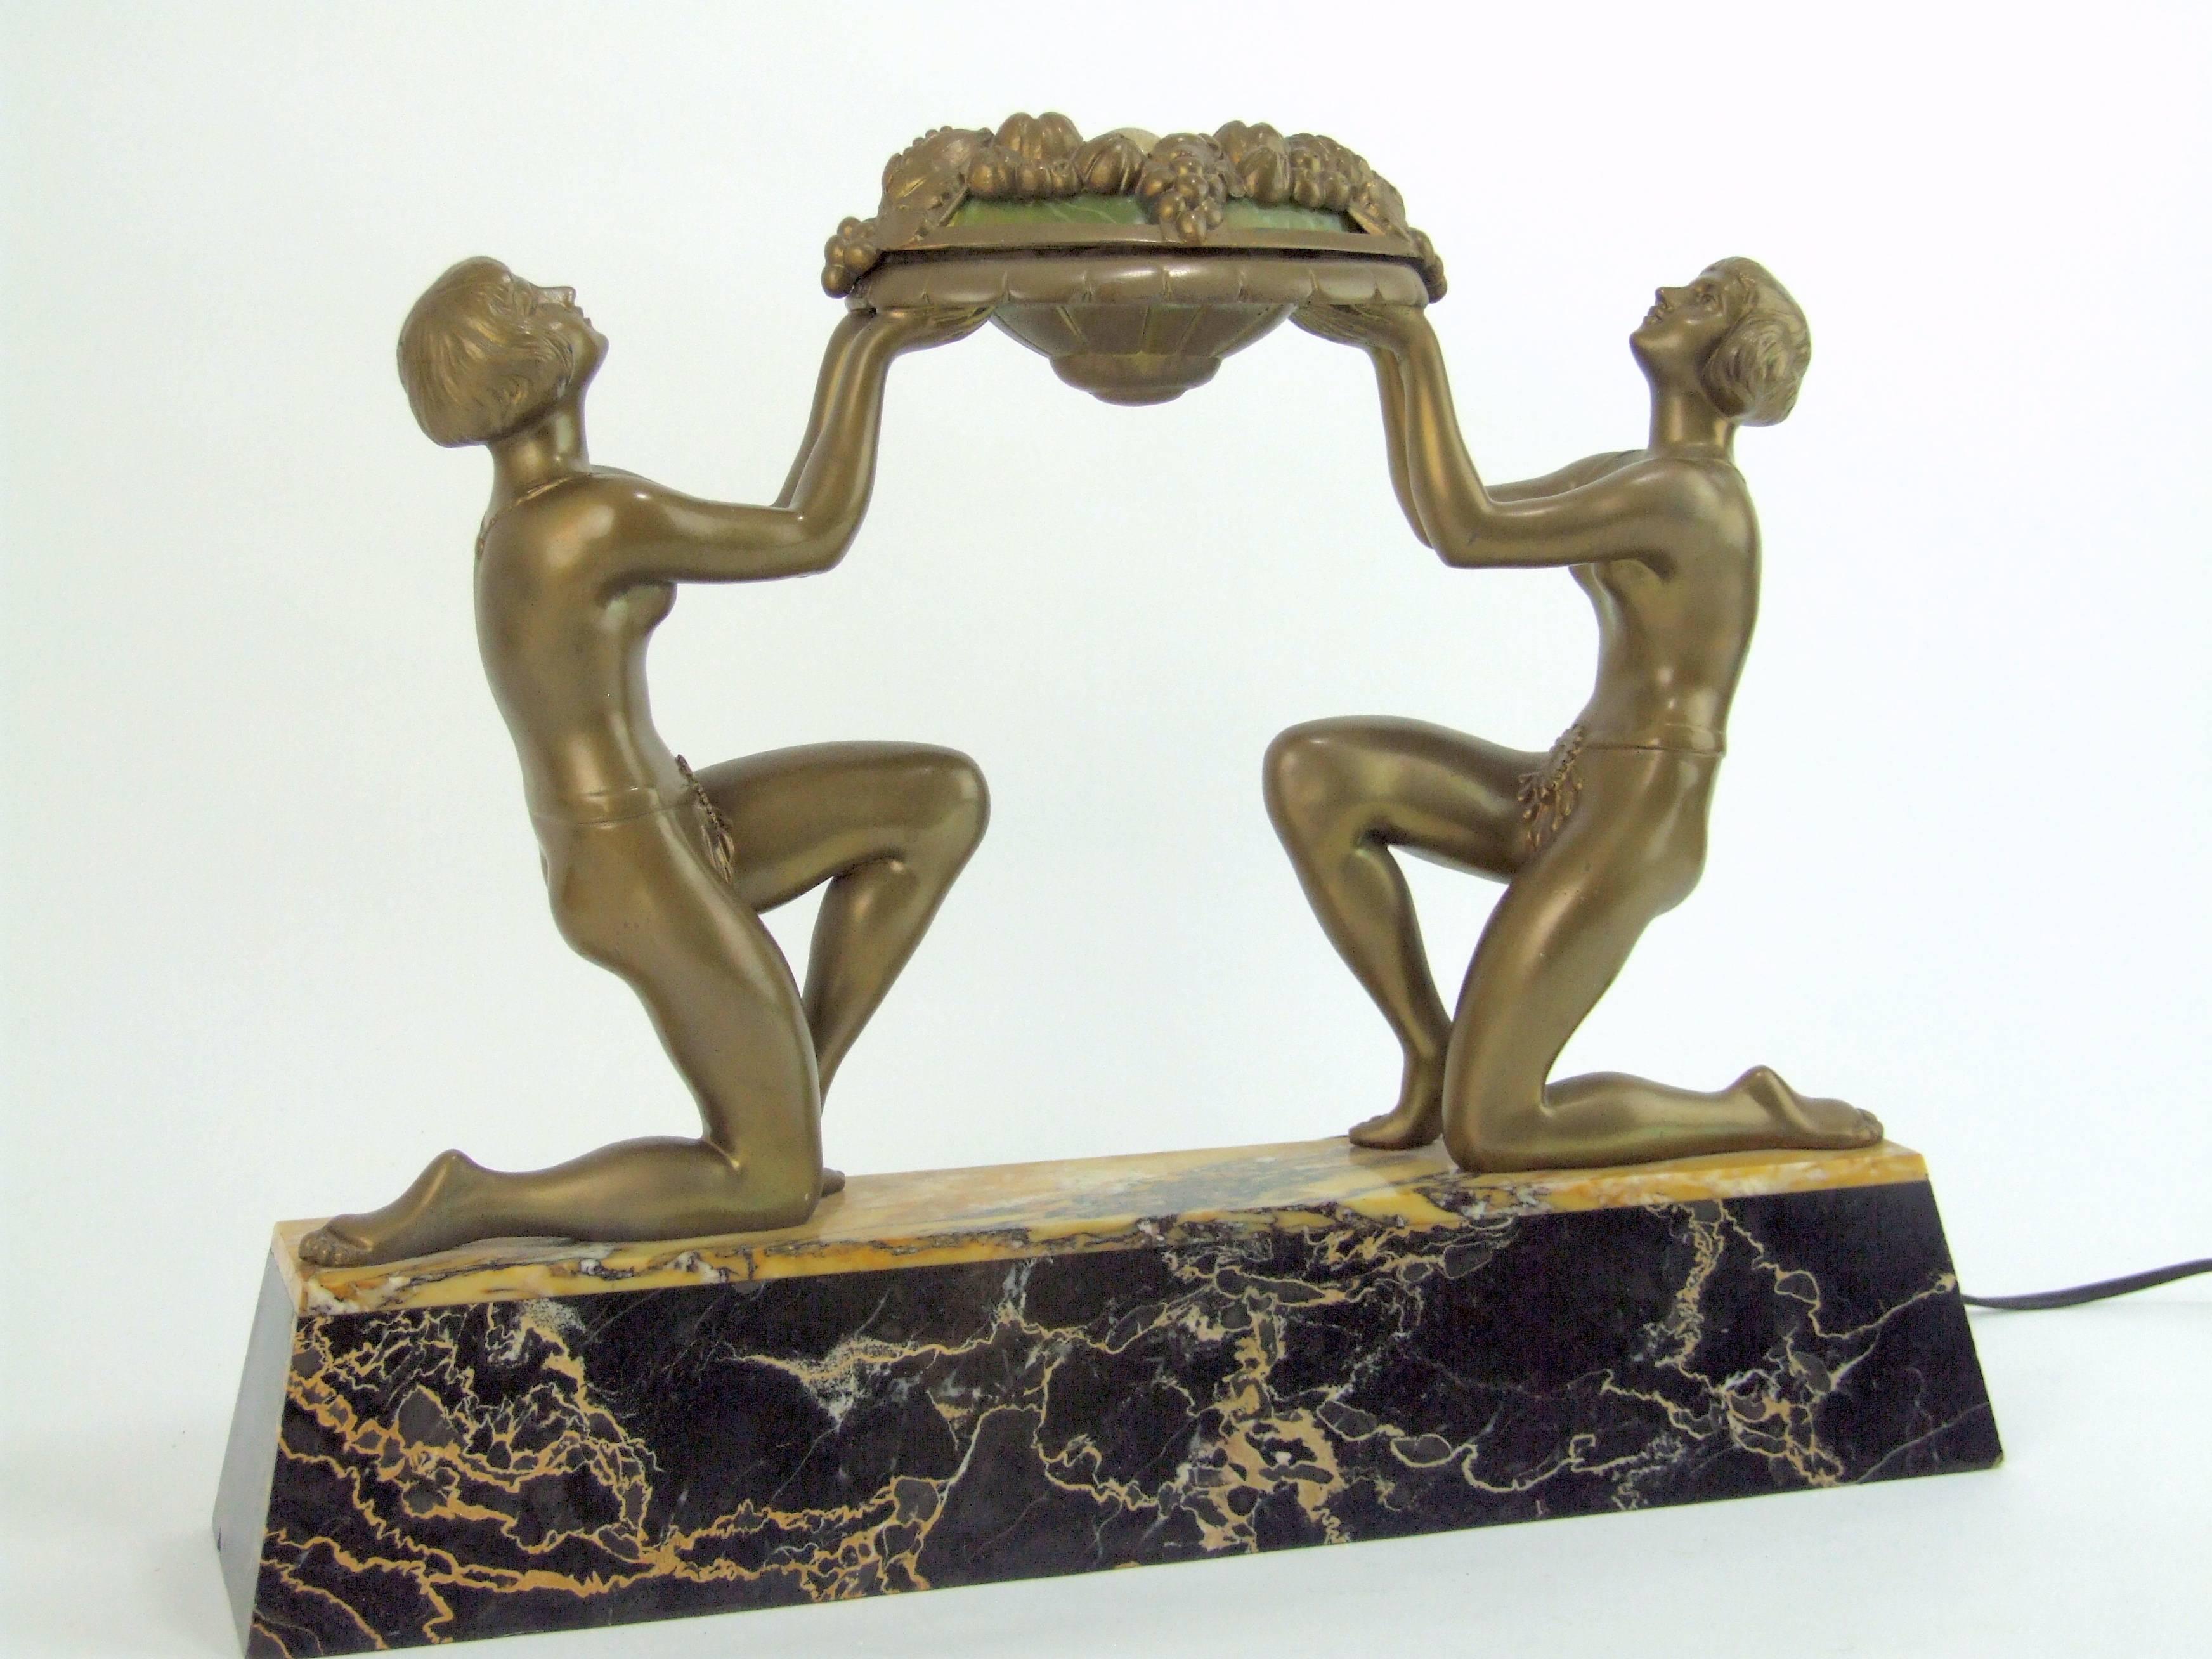 French spelter Art Deco double lady lamp. A signed Limousin. The top section is the lamp cover and has phenolic green panel inserts. Mounted on a portorro and sienna marble base, it measures 16.5 inches wide by 3.75 inches deep by 12.5 inches high